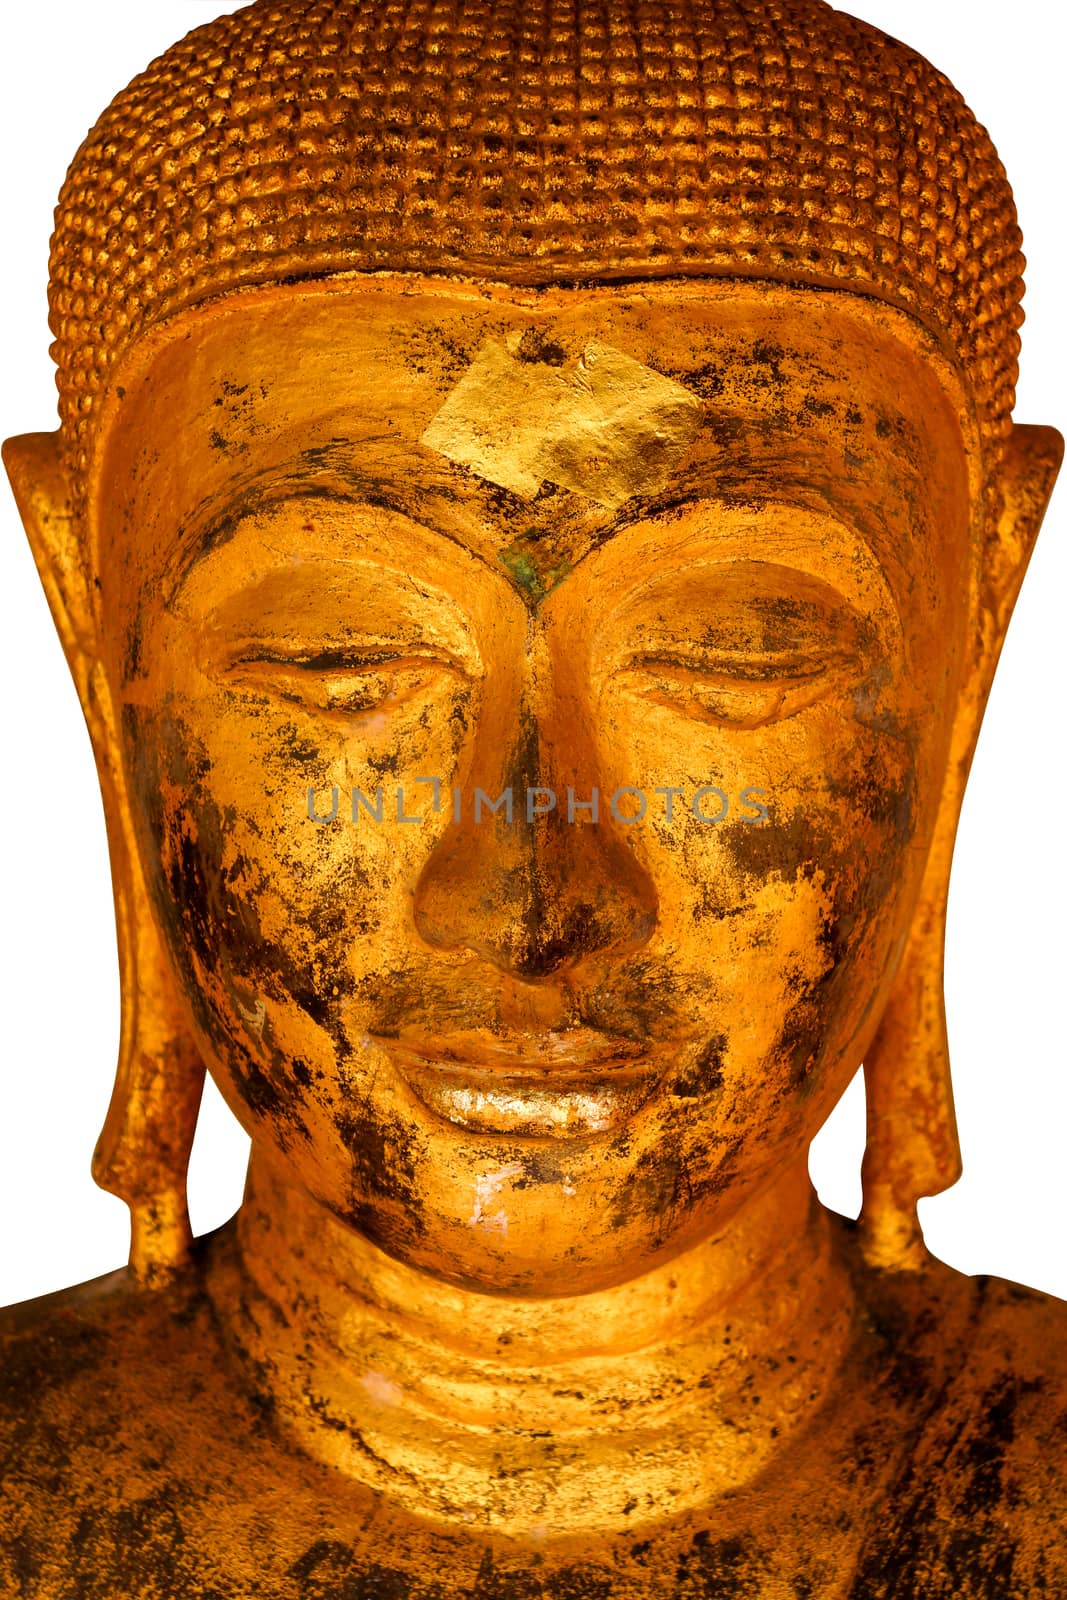 Close up shot of the smile Buddha's face by Noppharat_th